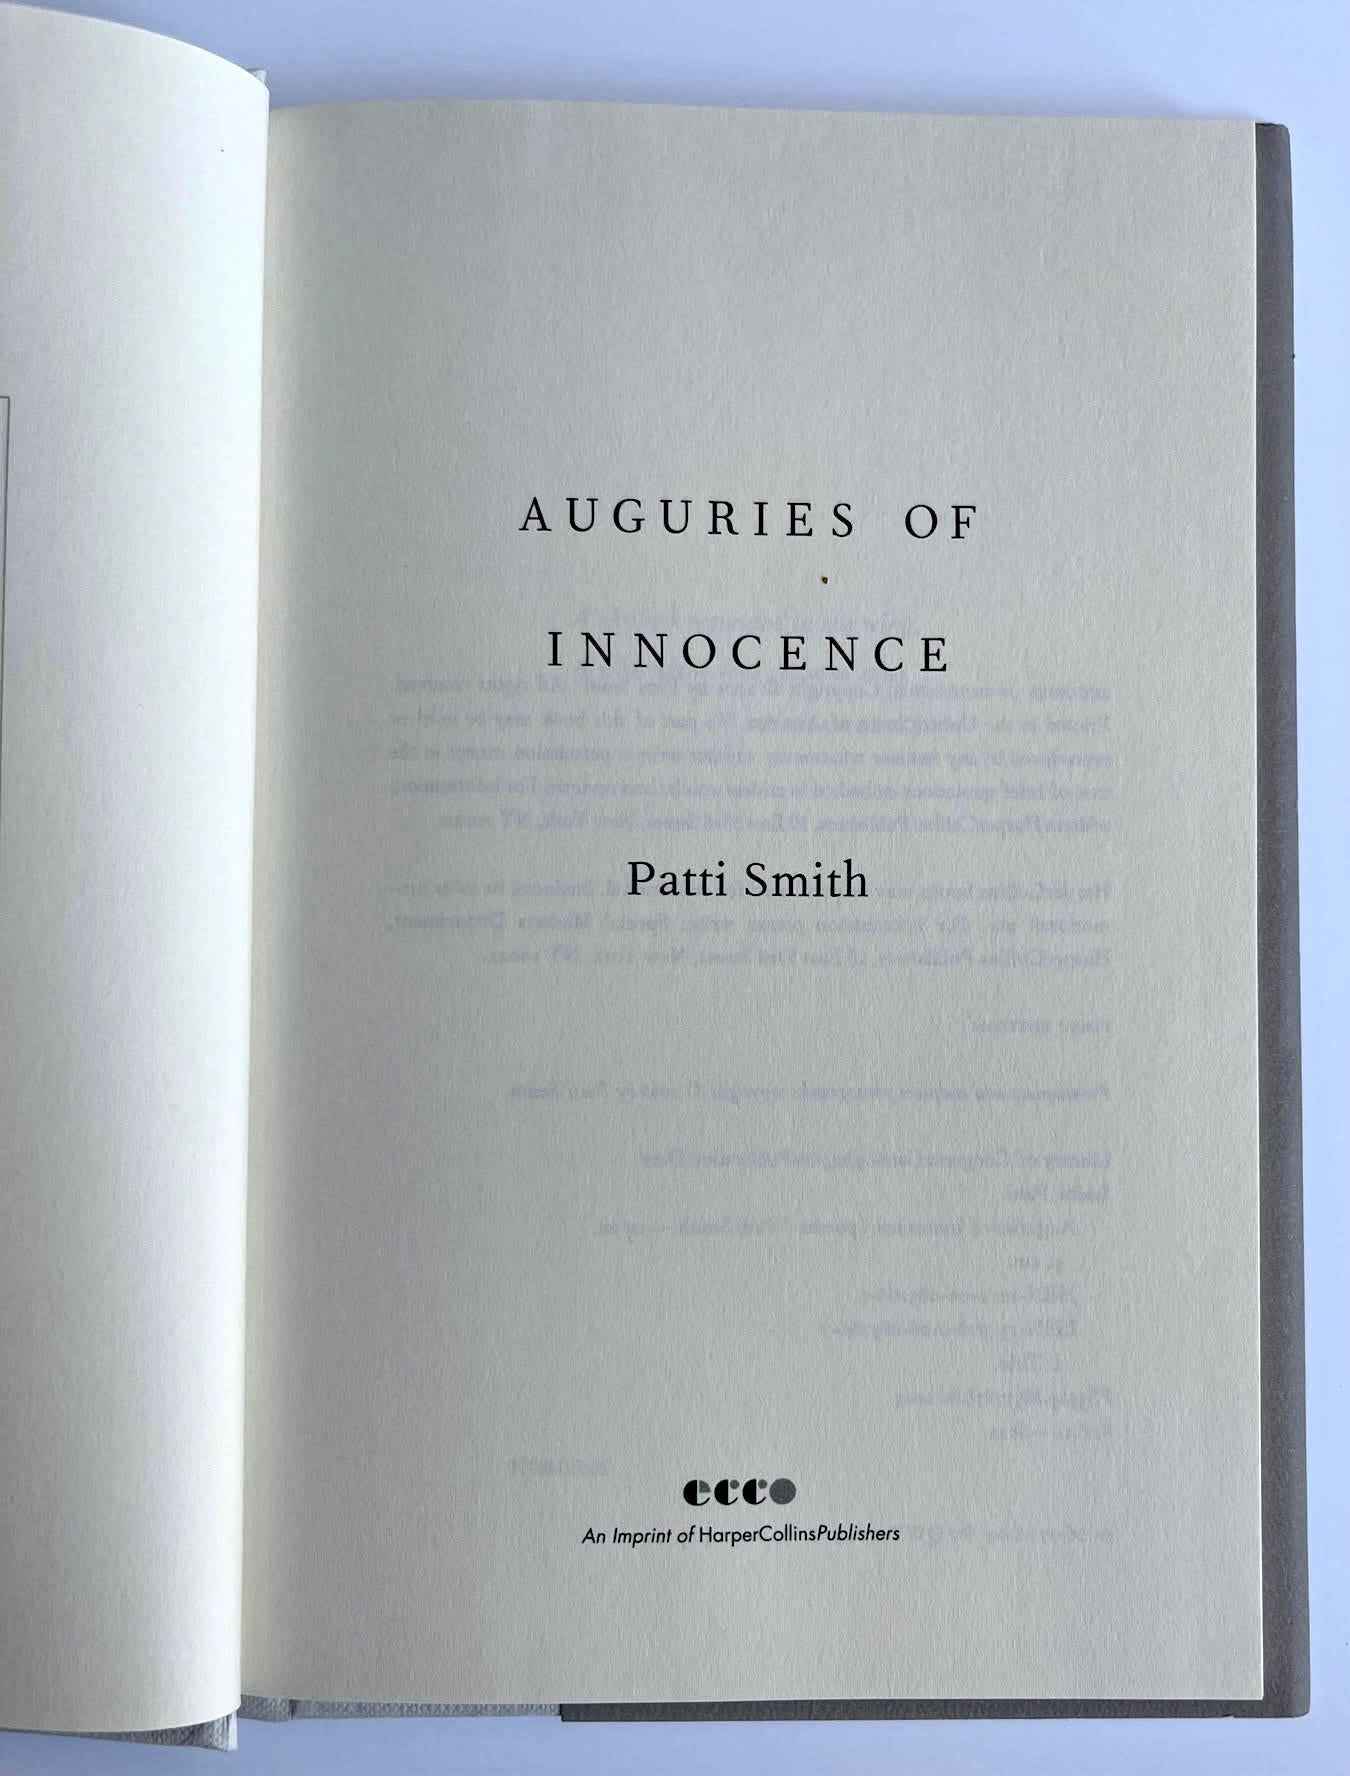 Patti Smith
Auguries of Innocence (Hand signed poetry book), 2005
Hardback monograph (Hand signed by Patti Smith on the first front end page)
Hand signed by Patti Smith on the first front end page
8 1/2 × 5 1/4 × 1/2 inches
Hand signed by Patti